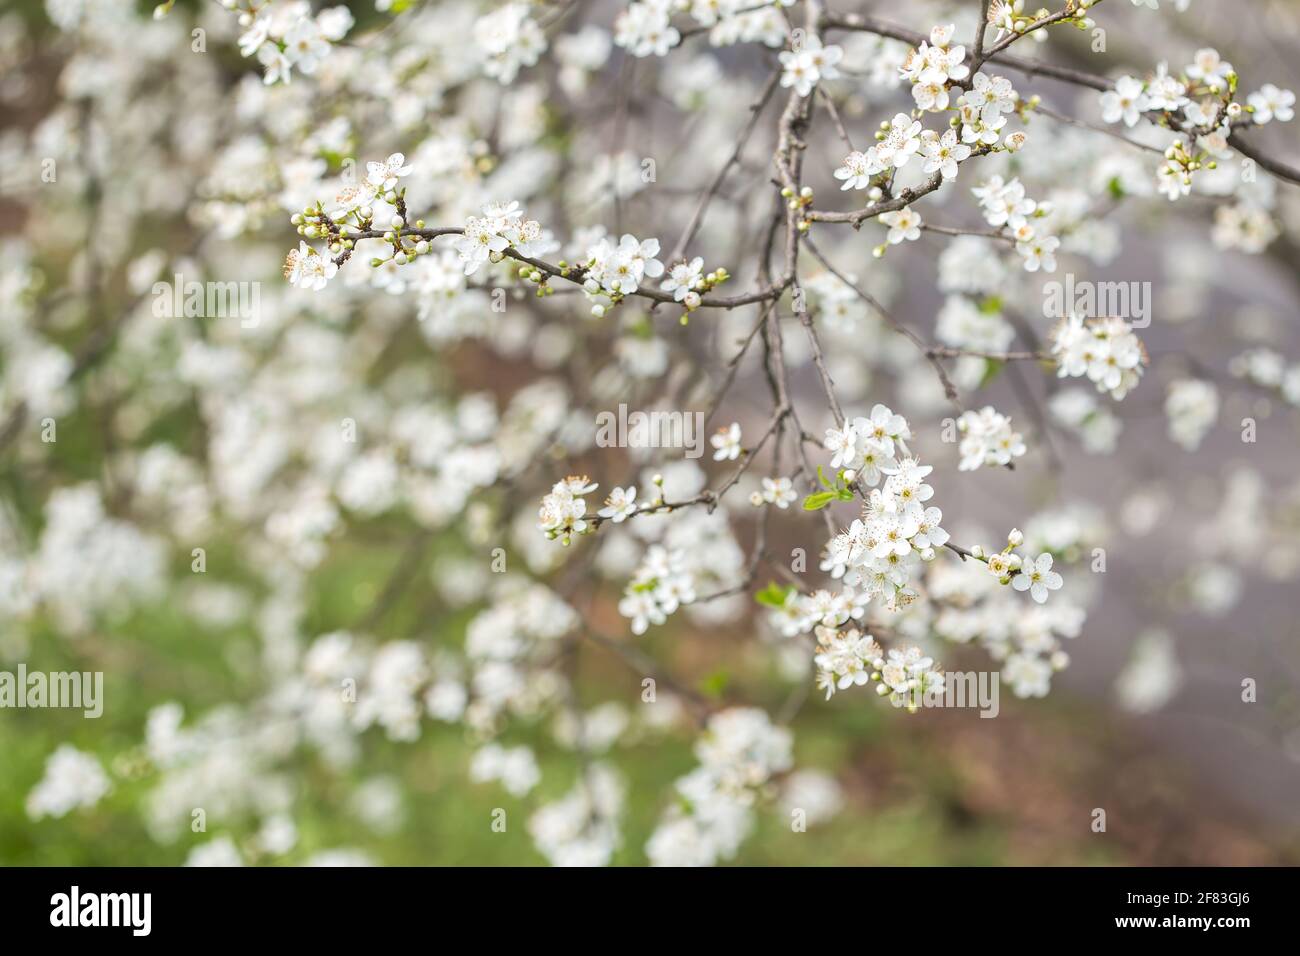 Prunus spinosa, called blackthorn or sloe, is a species of flowering plant in the rose family Rosaceae Stock Photo